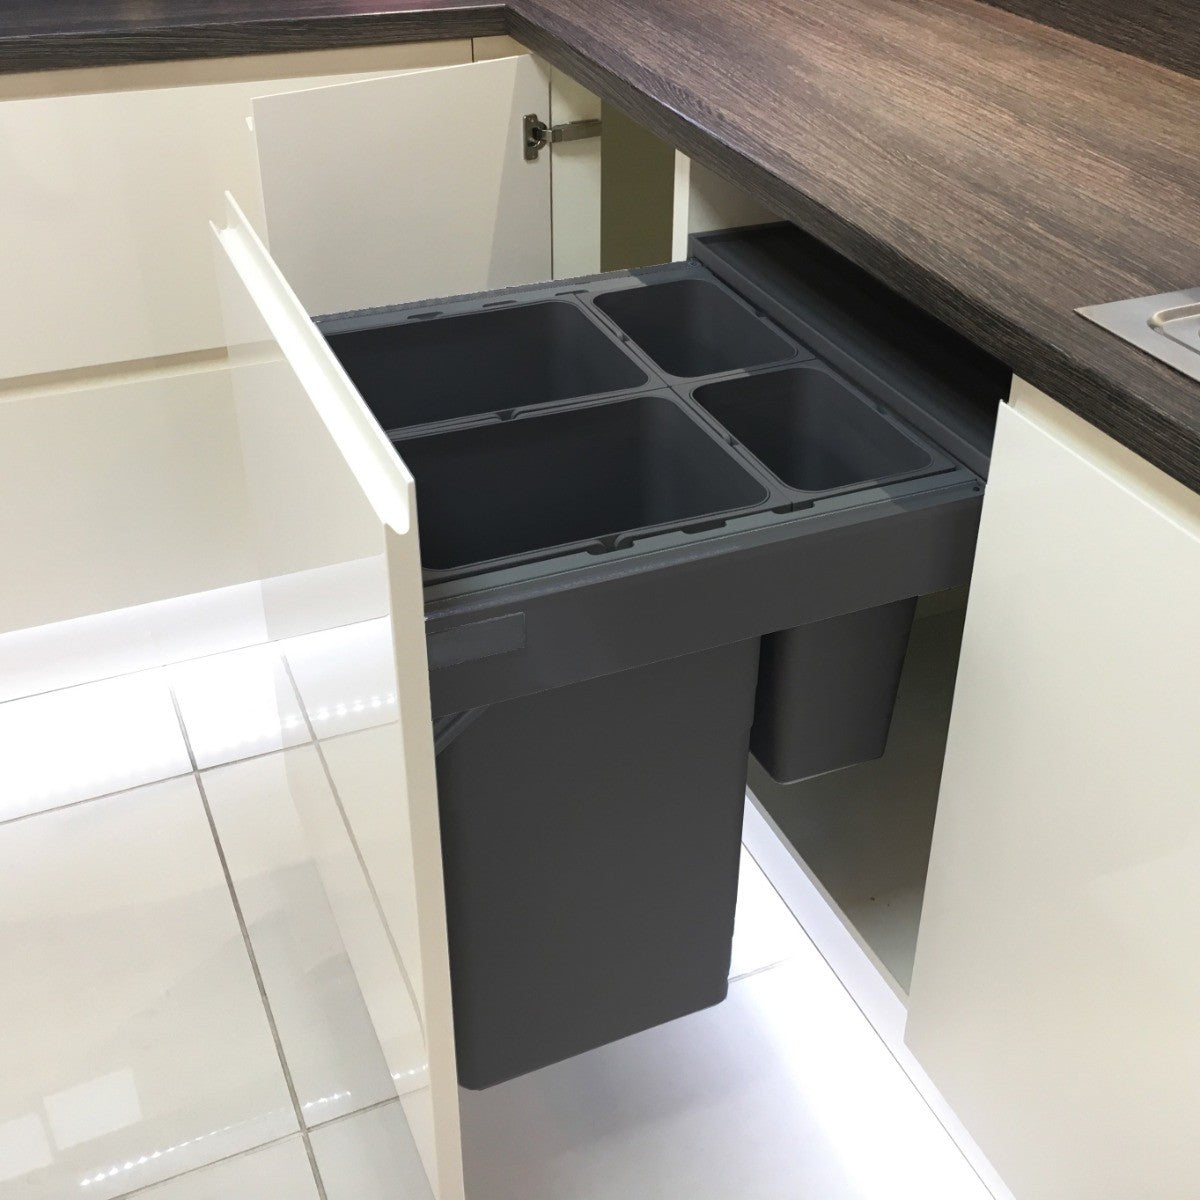 Ninka One2Five 80 litres in-cupboard bin with Four Compartment, designed for easy waste and recycling separation in 600mm wide kitchen cabinets with pull-out doors.